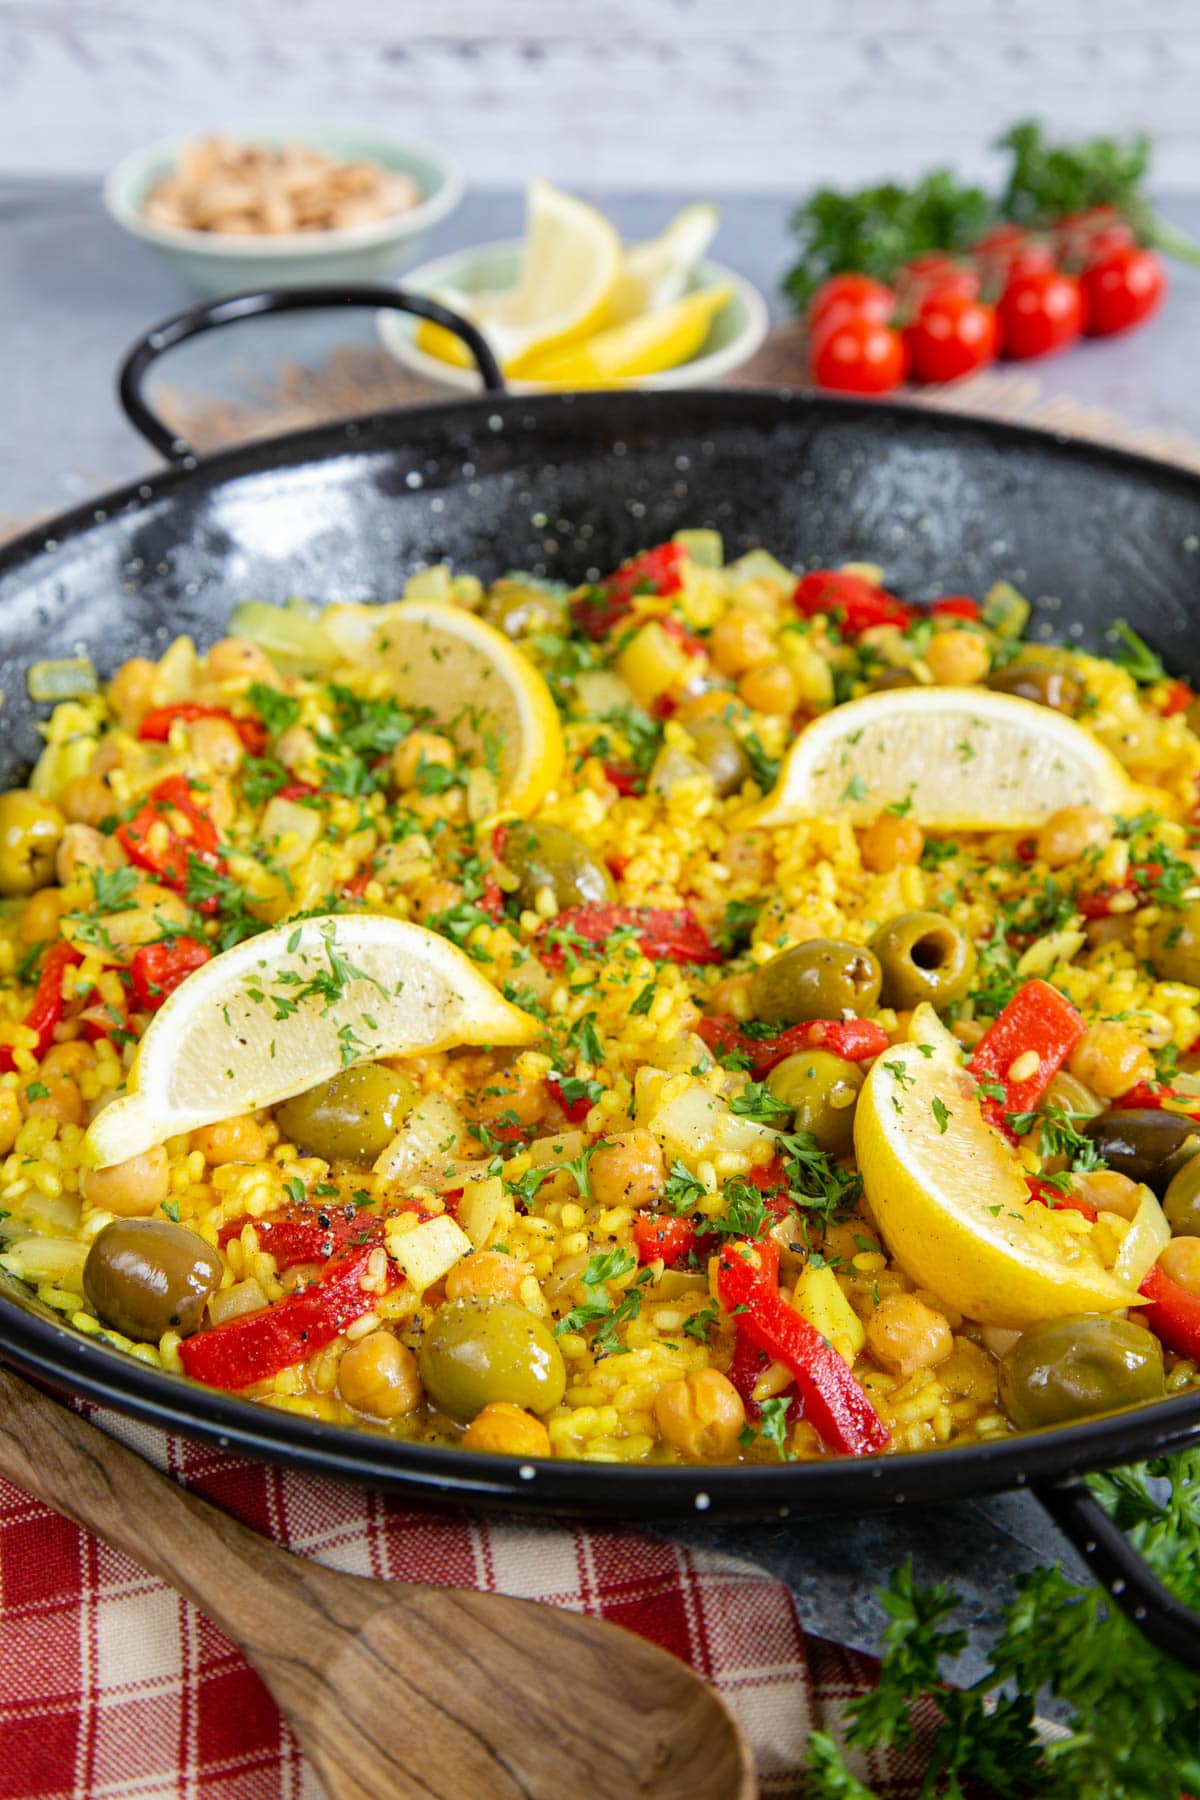 A close up on a black pan full of veggie paella, with lemon wedges on top. In the foreground is parsley, a cloth and a wooden spoon.